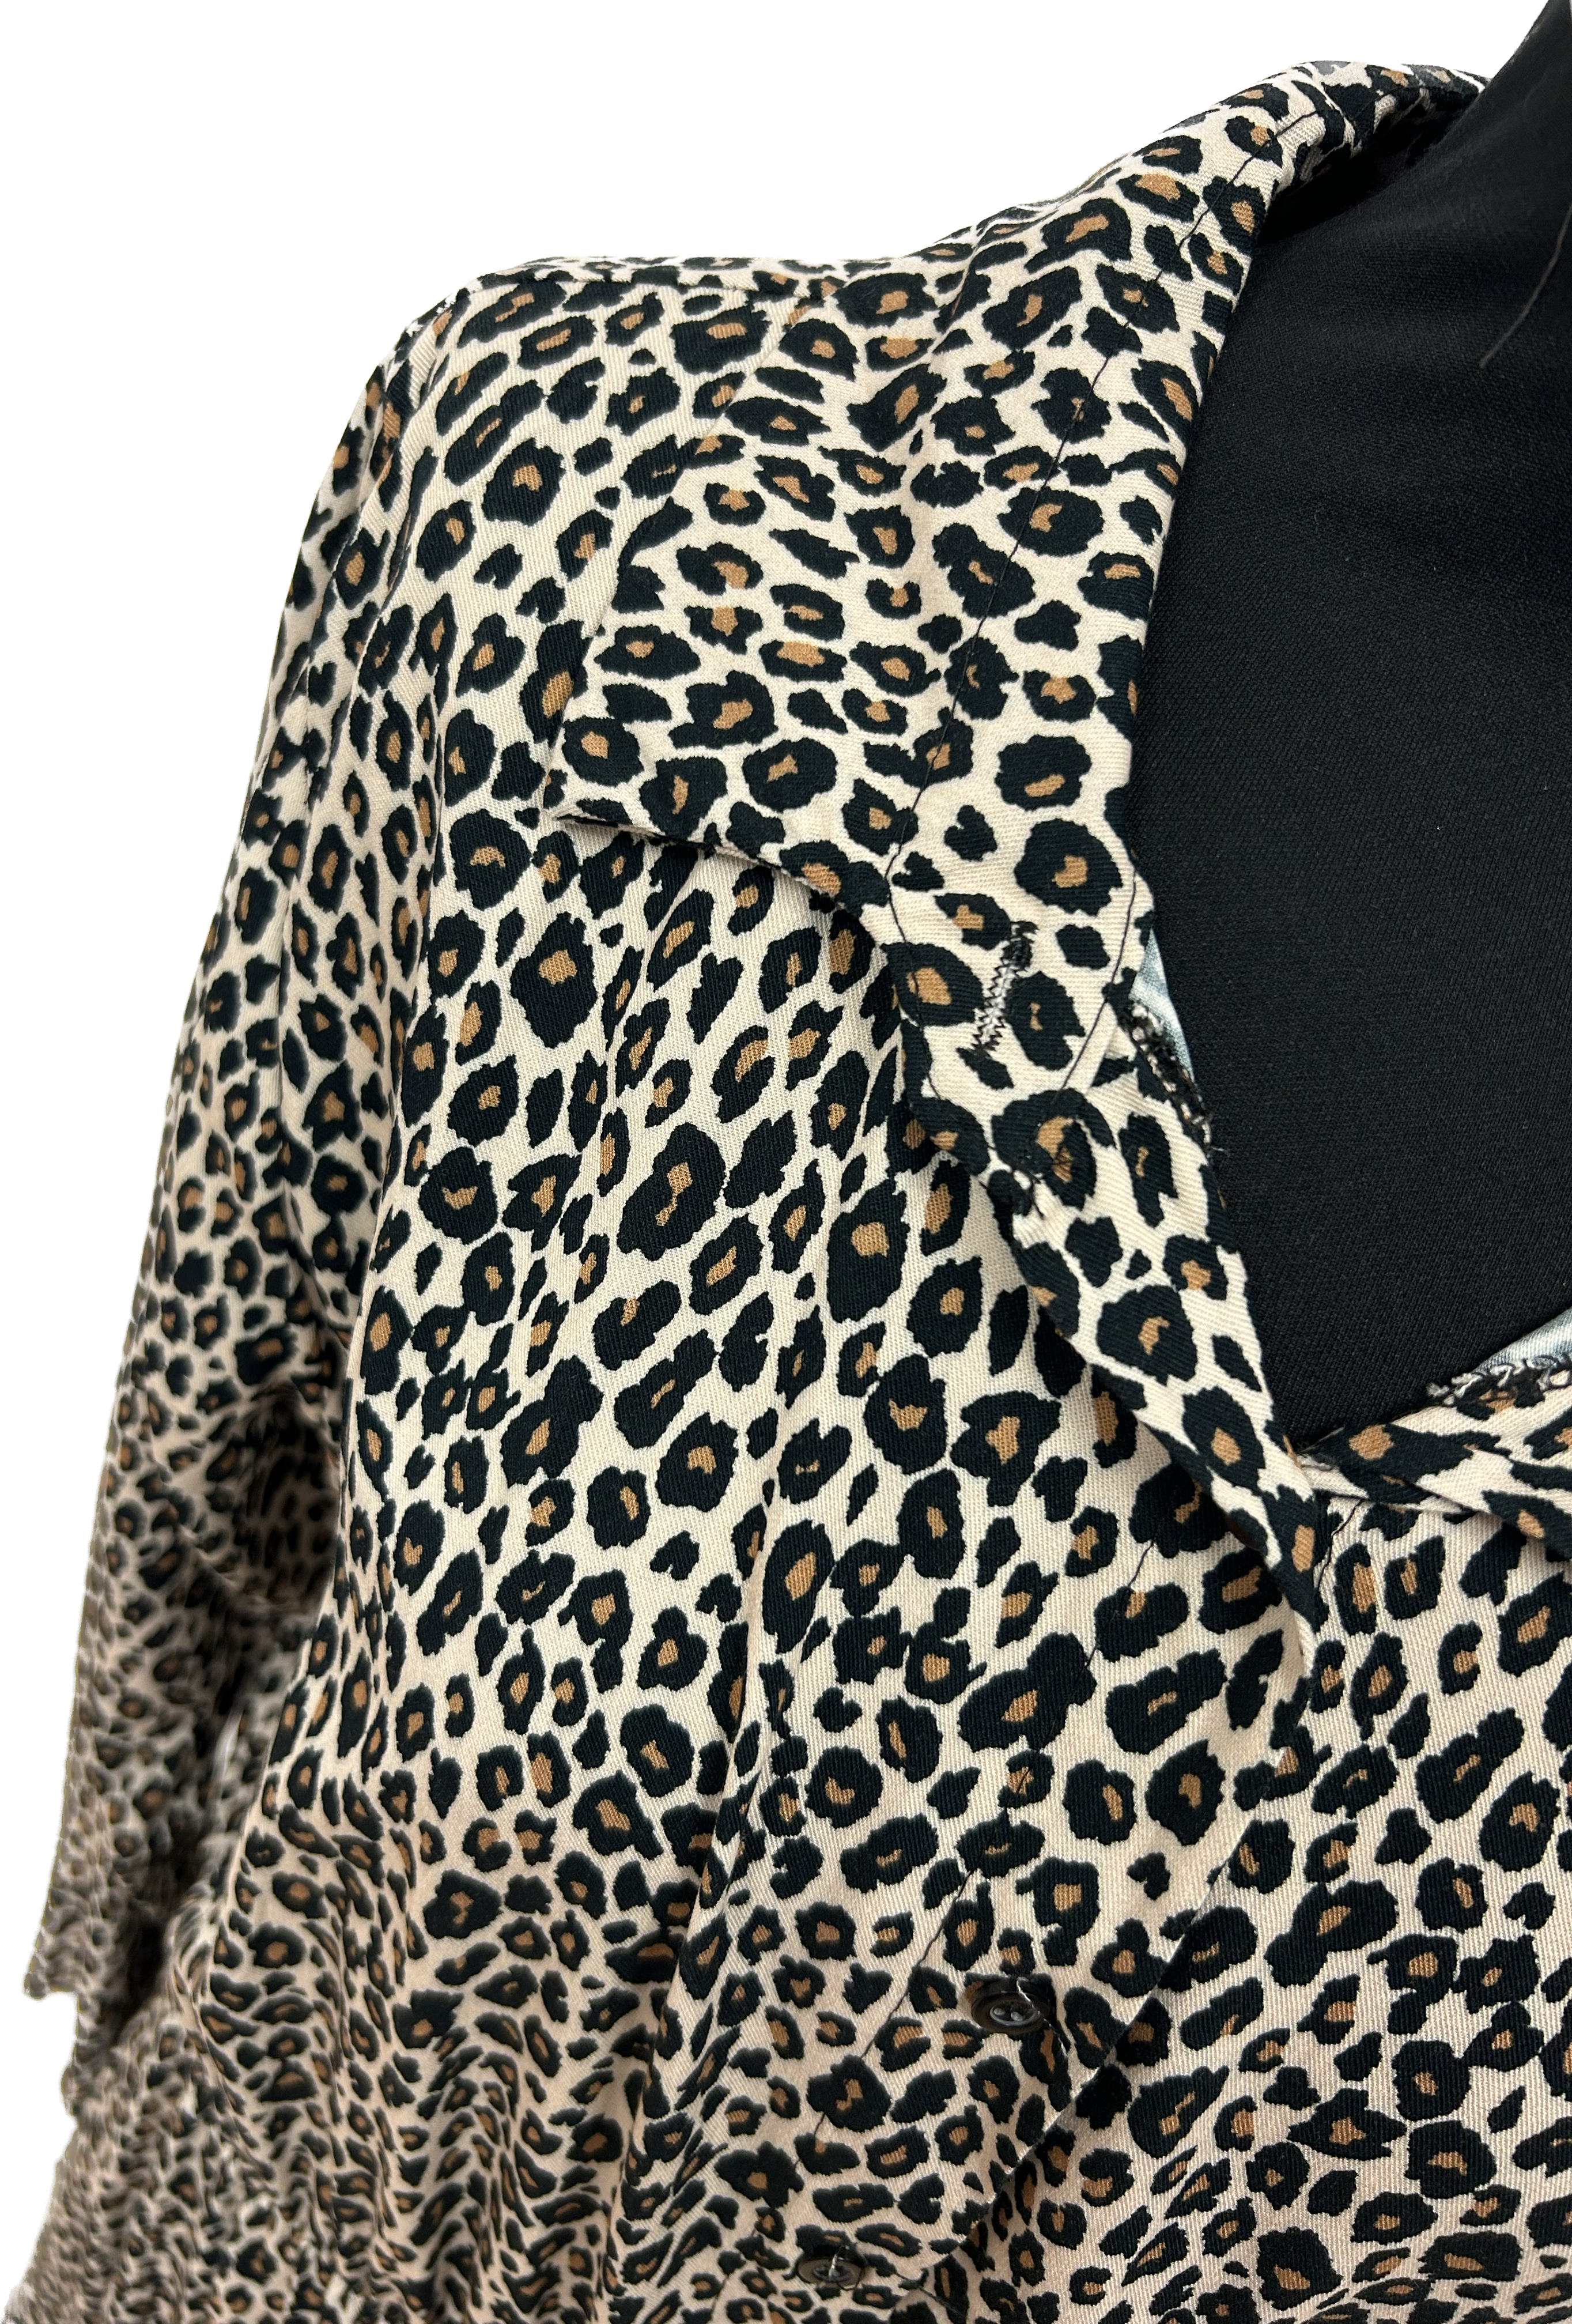 Leopard Print Tiered Dress with Collar Detail (12-16)